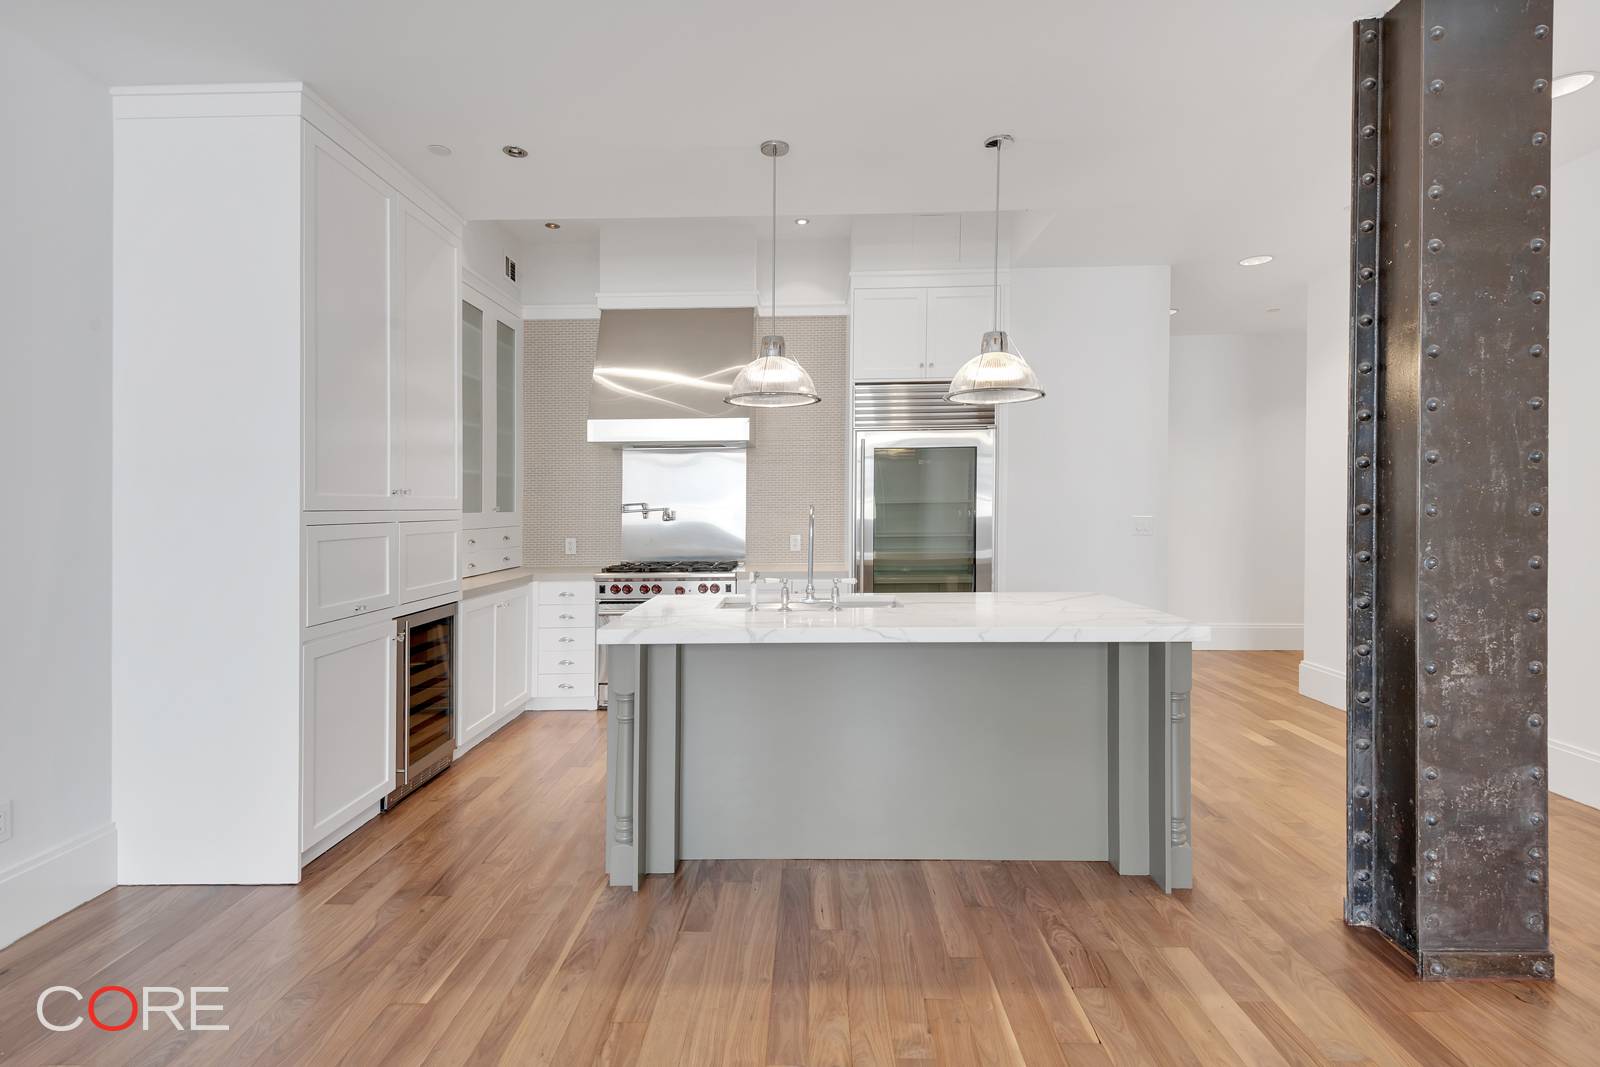 Welcome to Residence 9D at 141 Fifth Avenue, a spacious two bedroom, two and a half bathroom loft that seamlessly blends prewar grandeur with modern, top of the line finishes ...